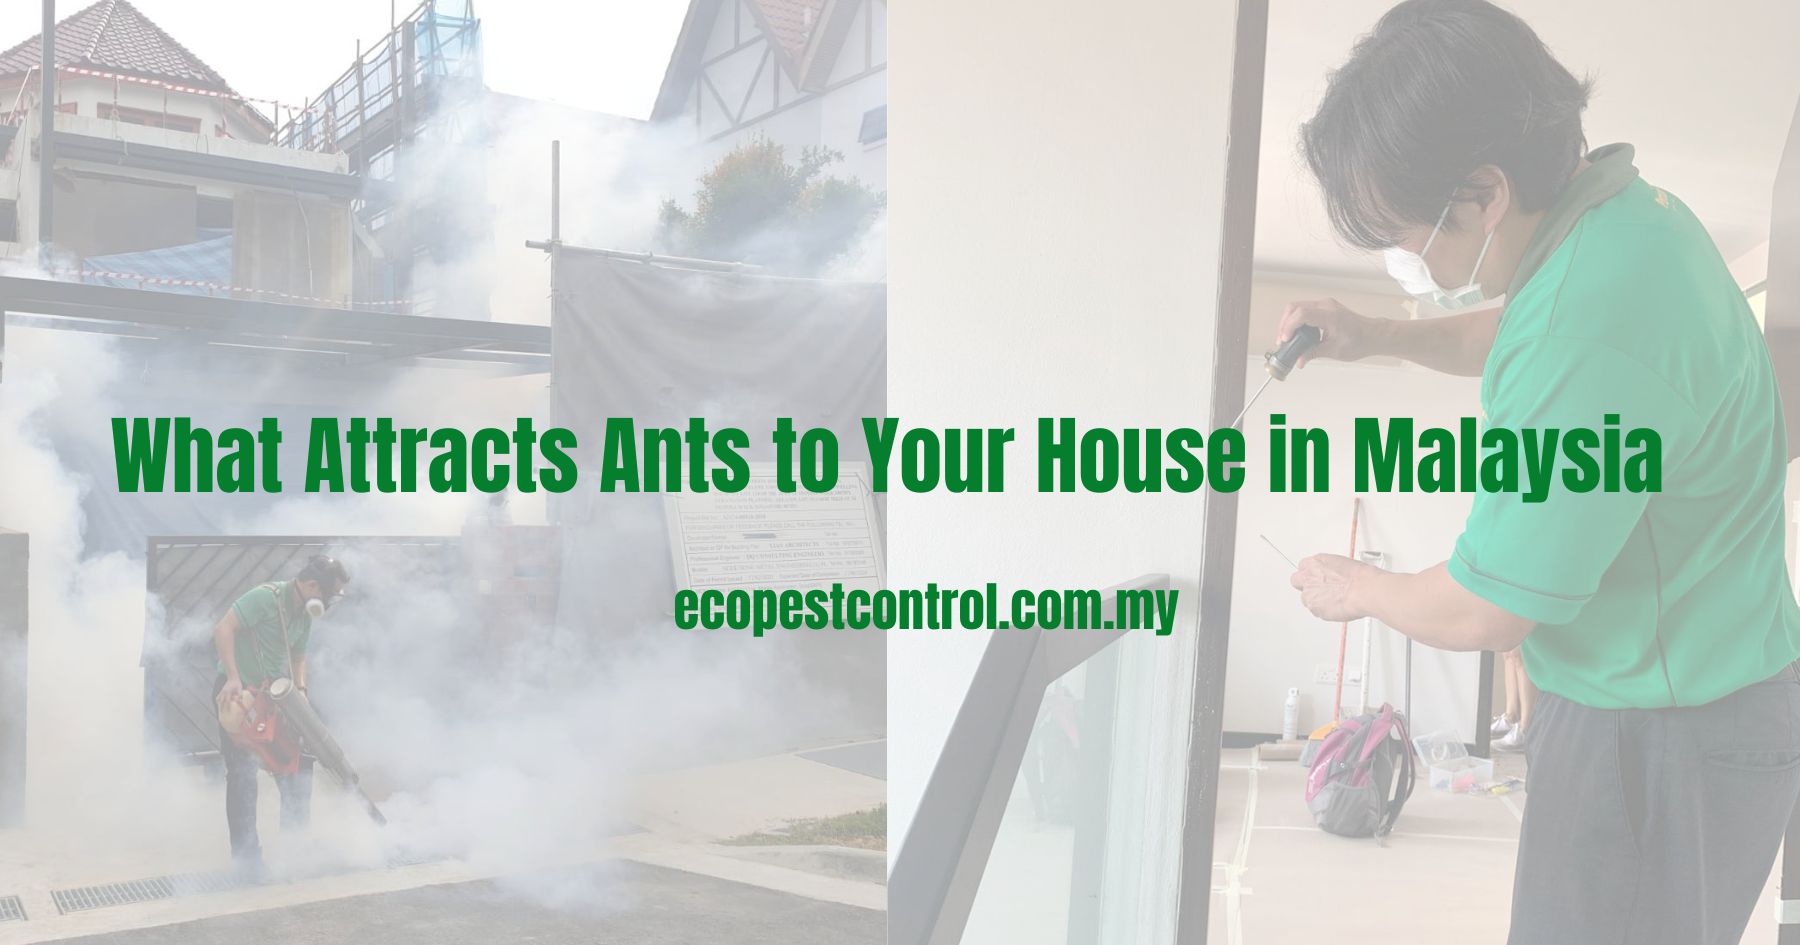 What Attracts Ants to Your House in Malaysia